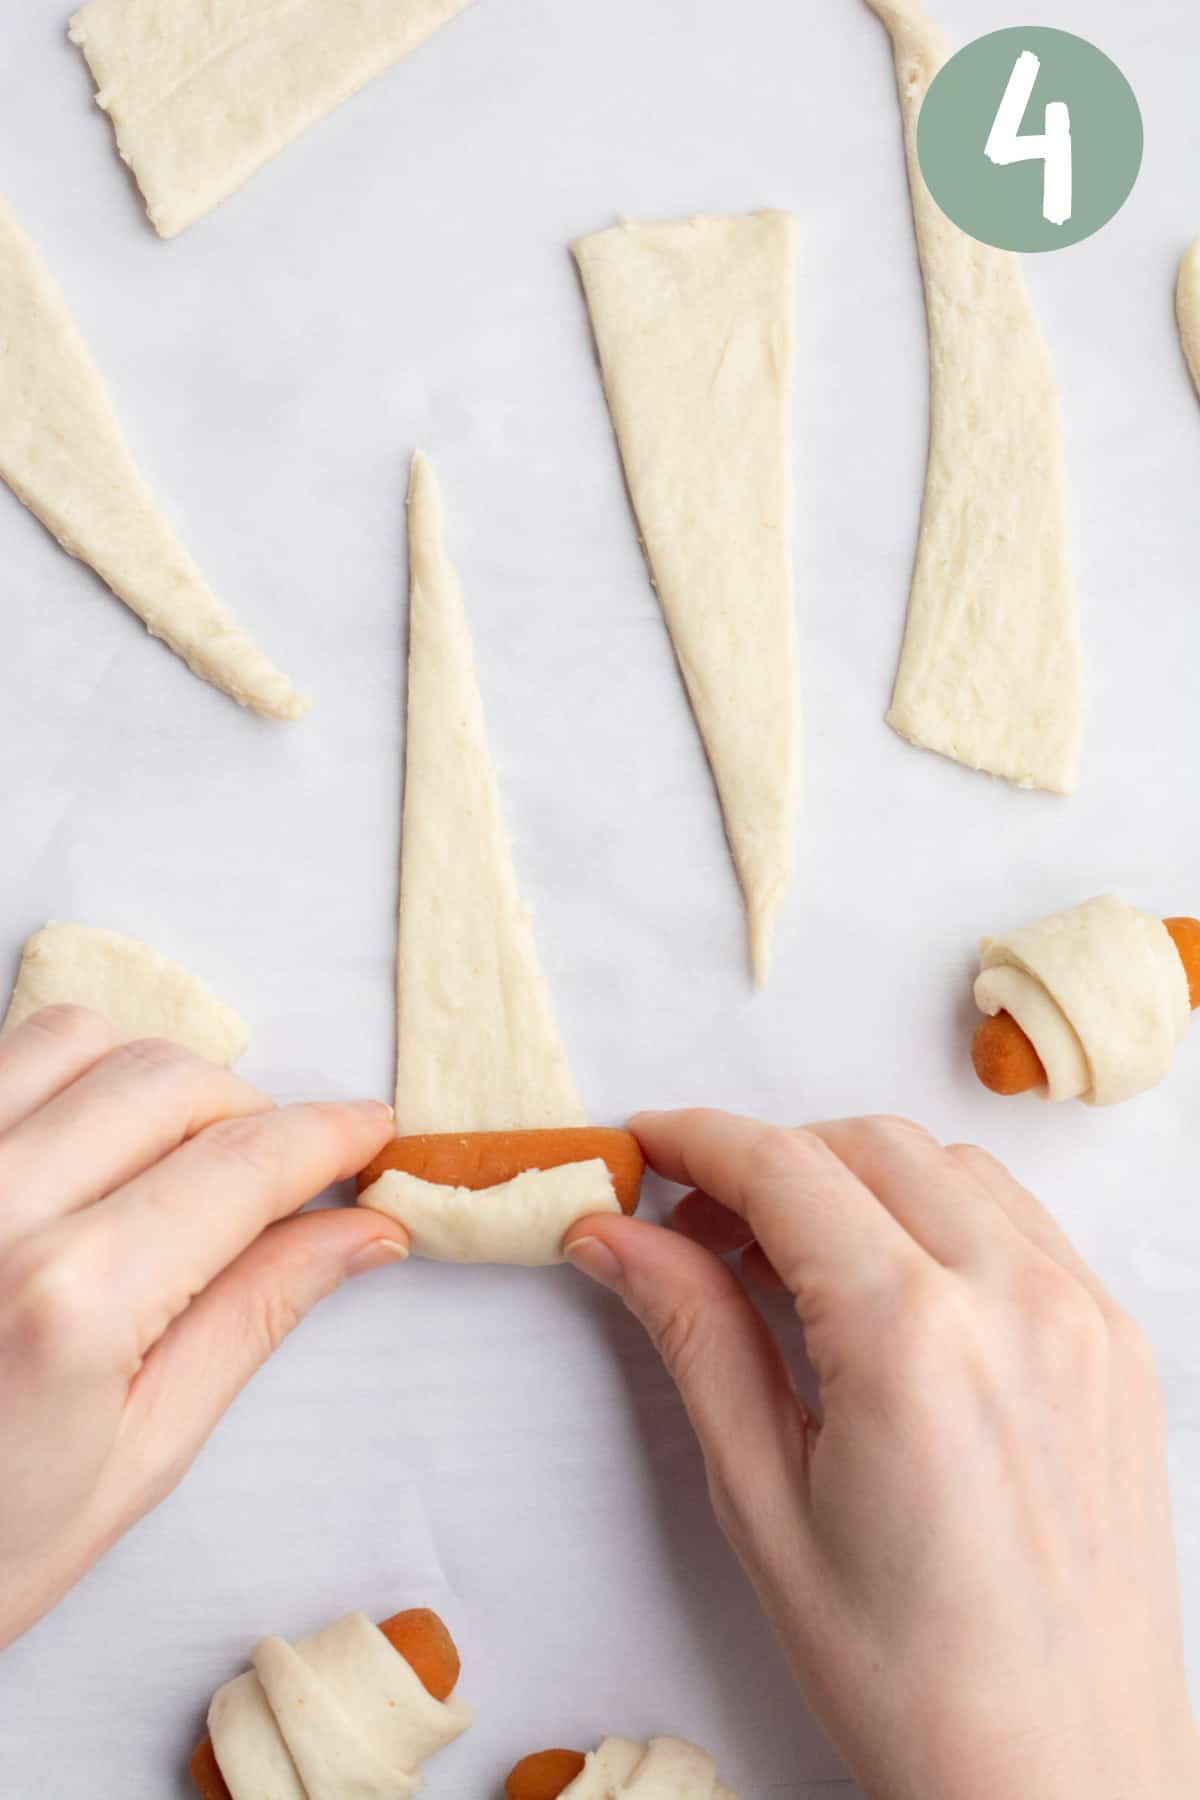 Hands rolling up a marinated carrot in a crescent dough triangle.